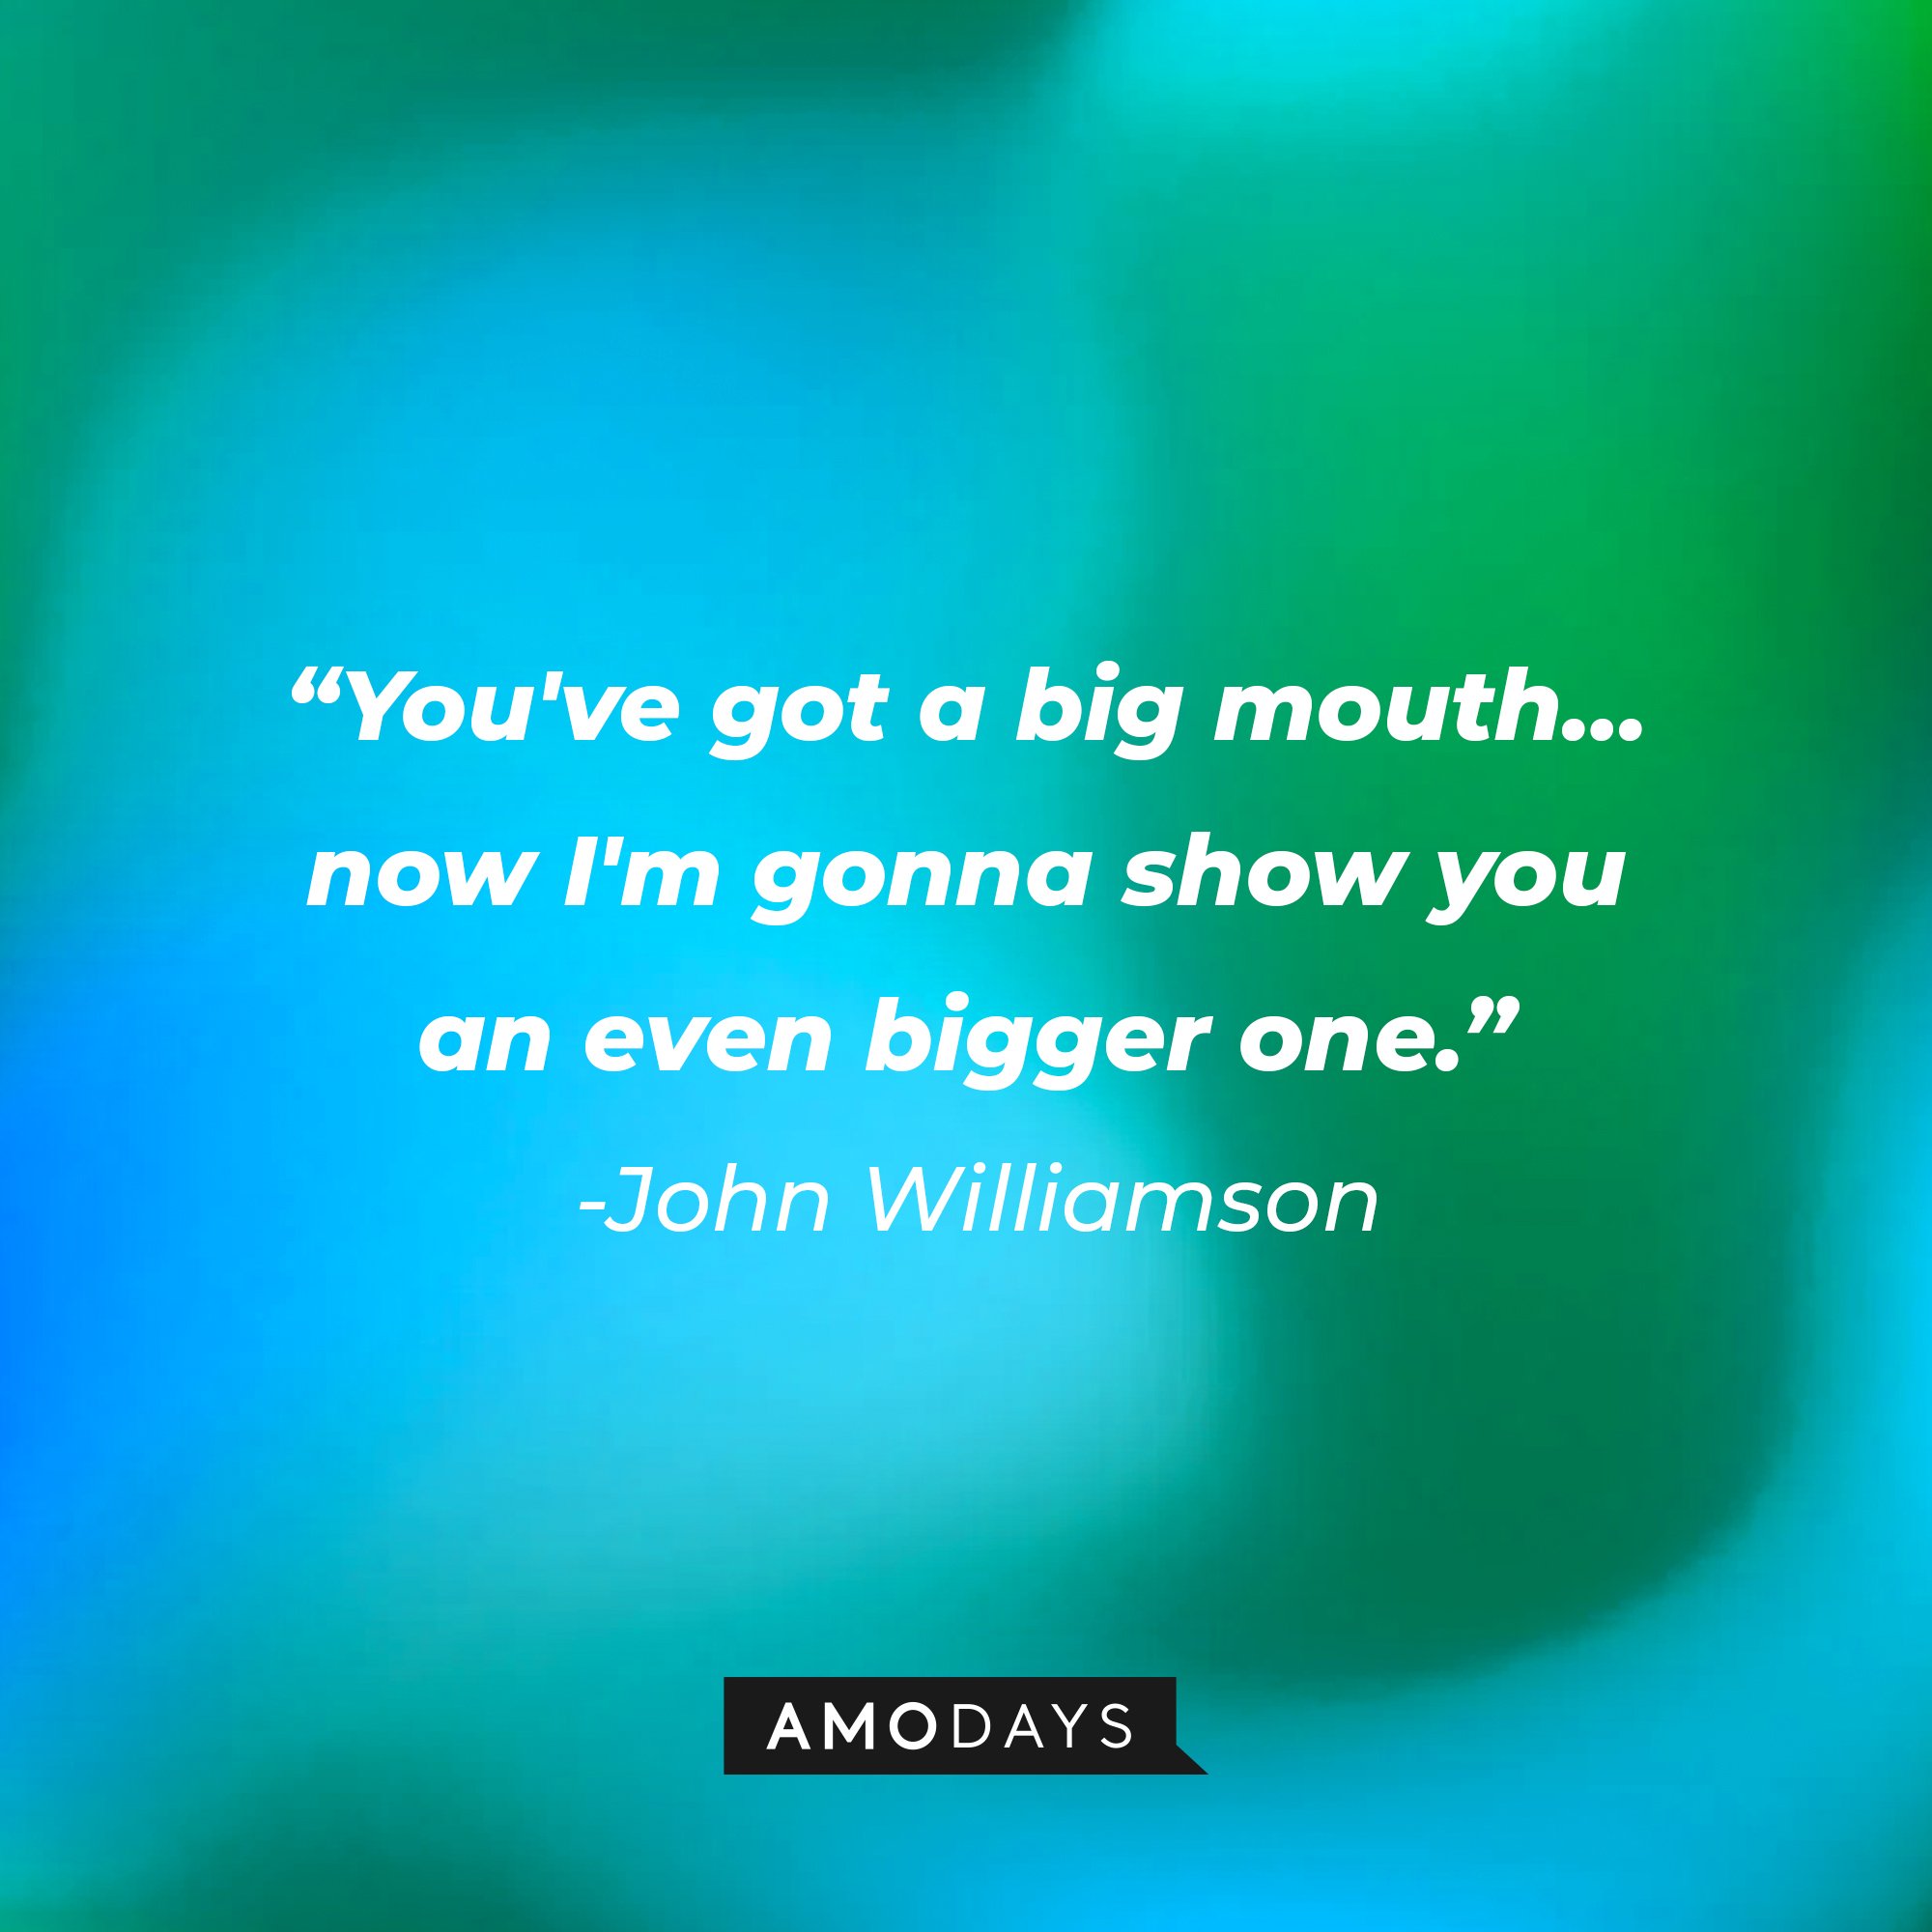   John Williamson’s quote: "You've got a big mouth… now I'm gonna show you an even bigger one." | Image: AmoDays